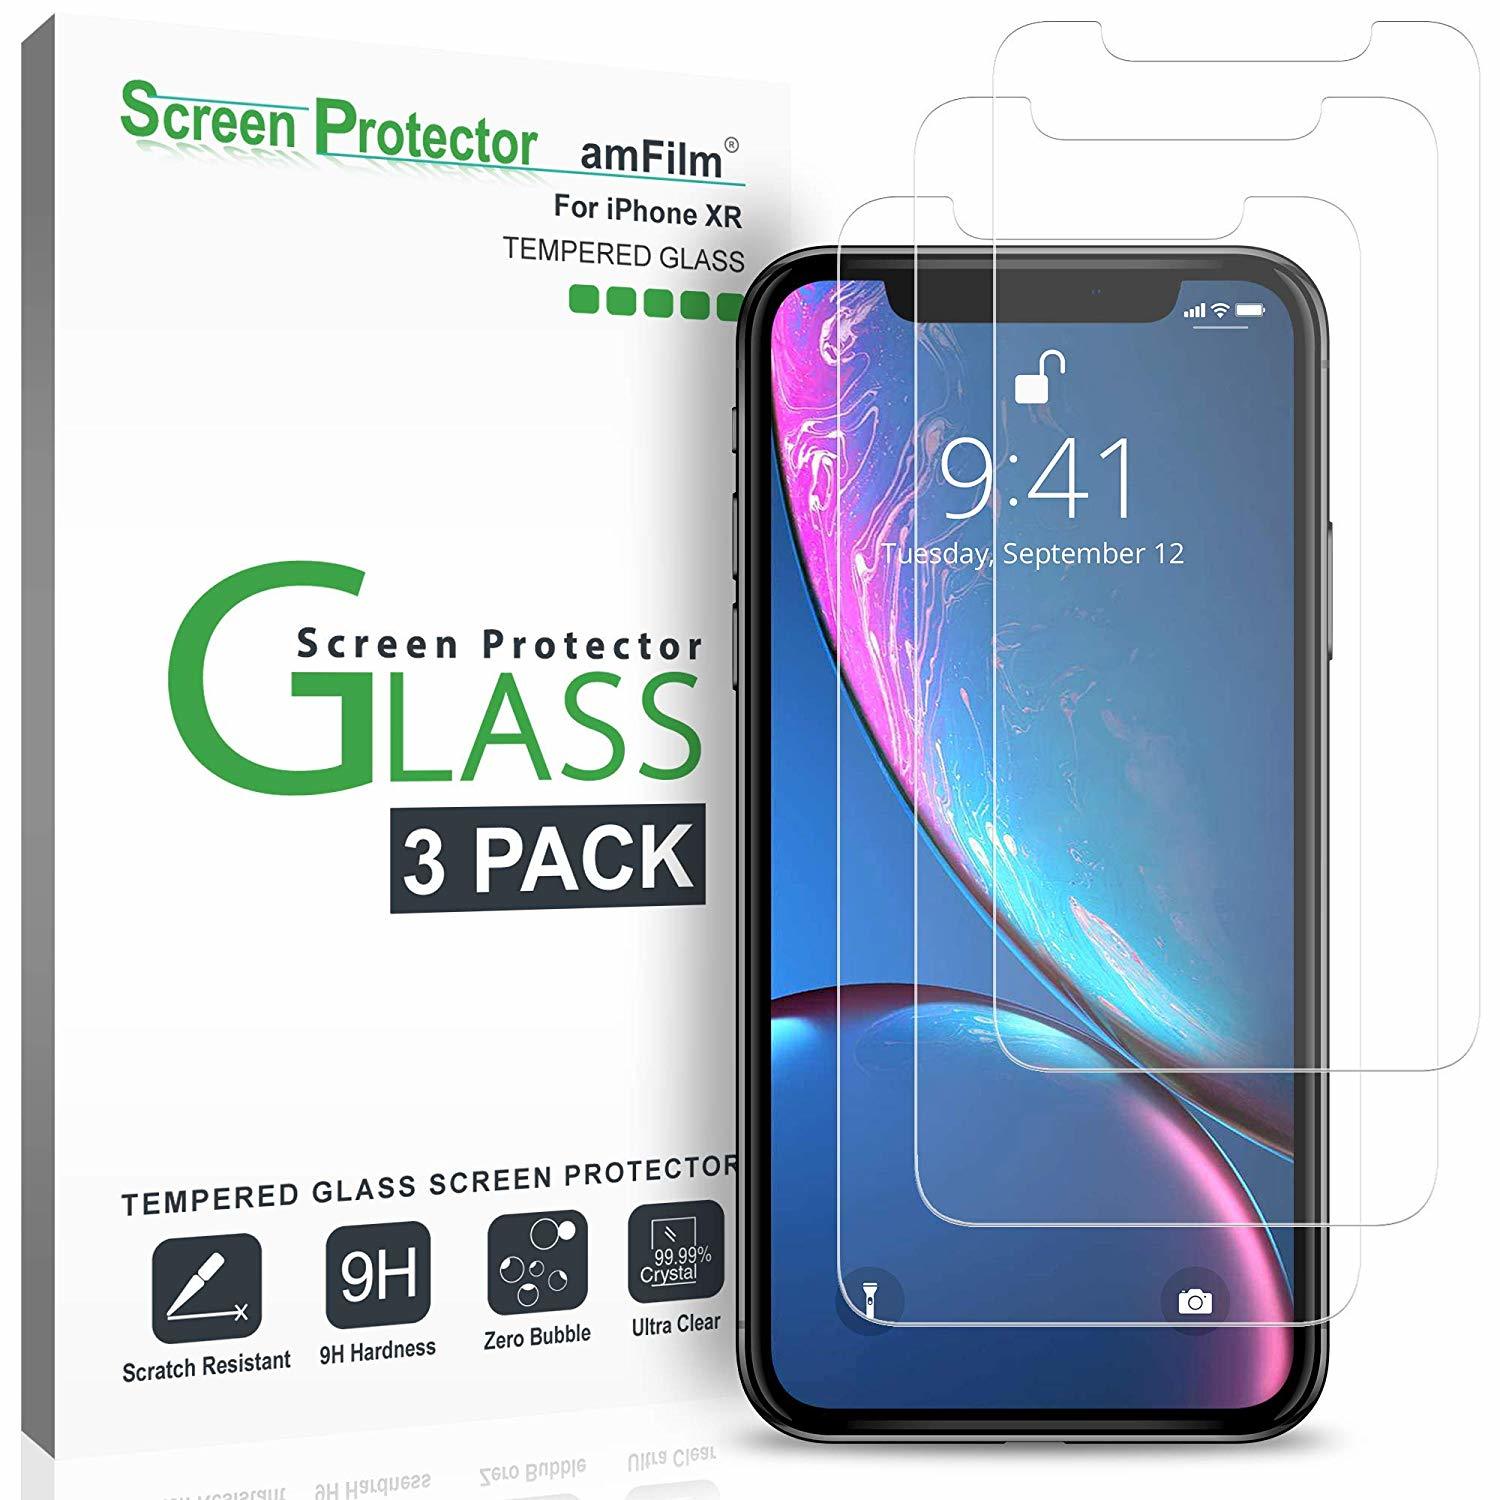 The best iPhone XR screen protectors